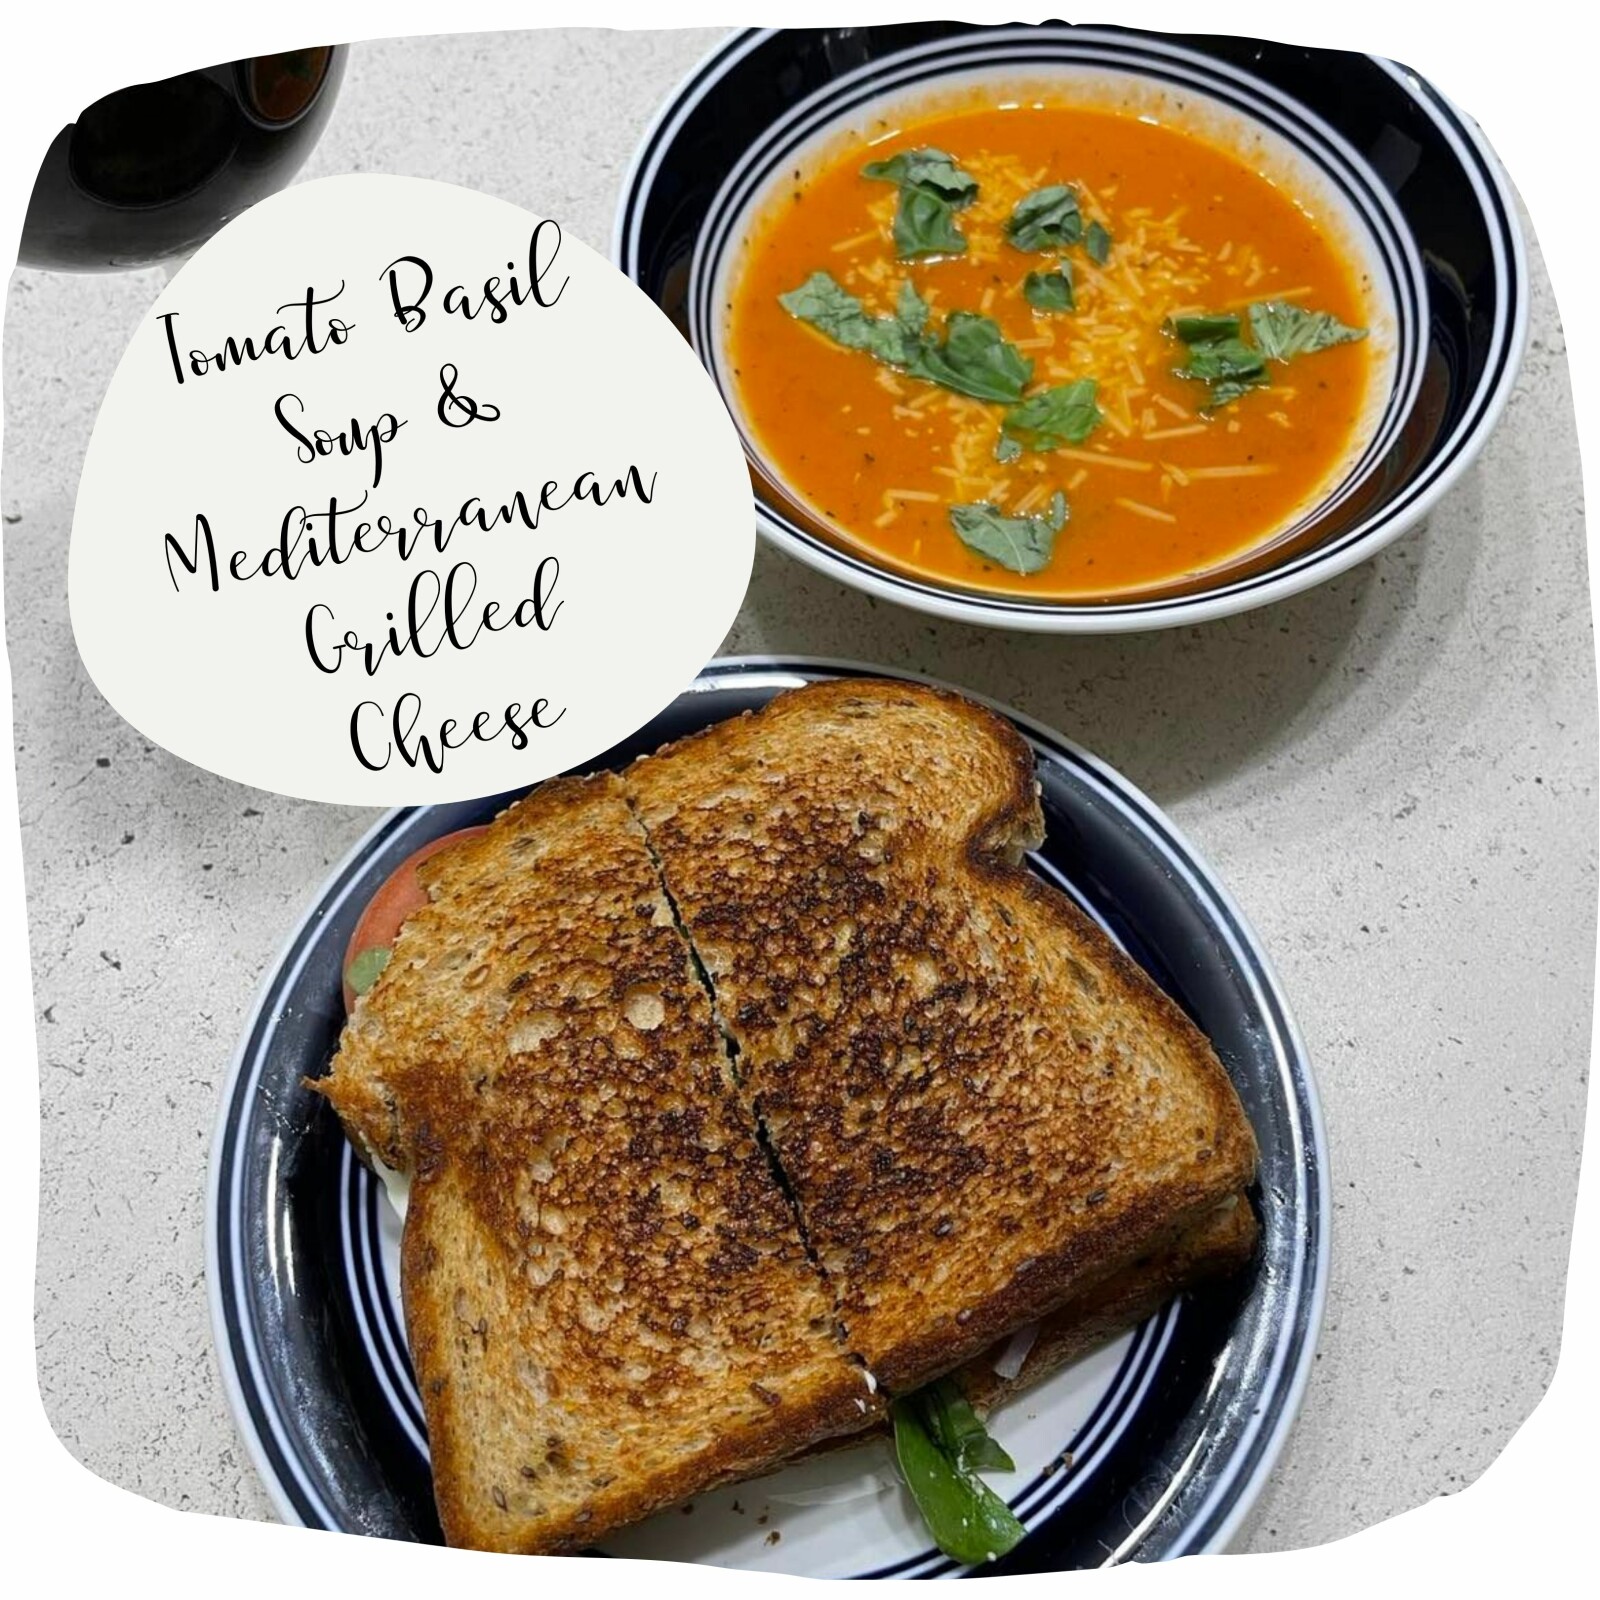 Tomato Basil Soup & Mediterranean Grilled Cheese